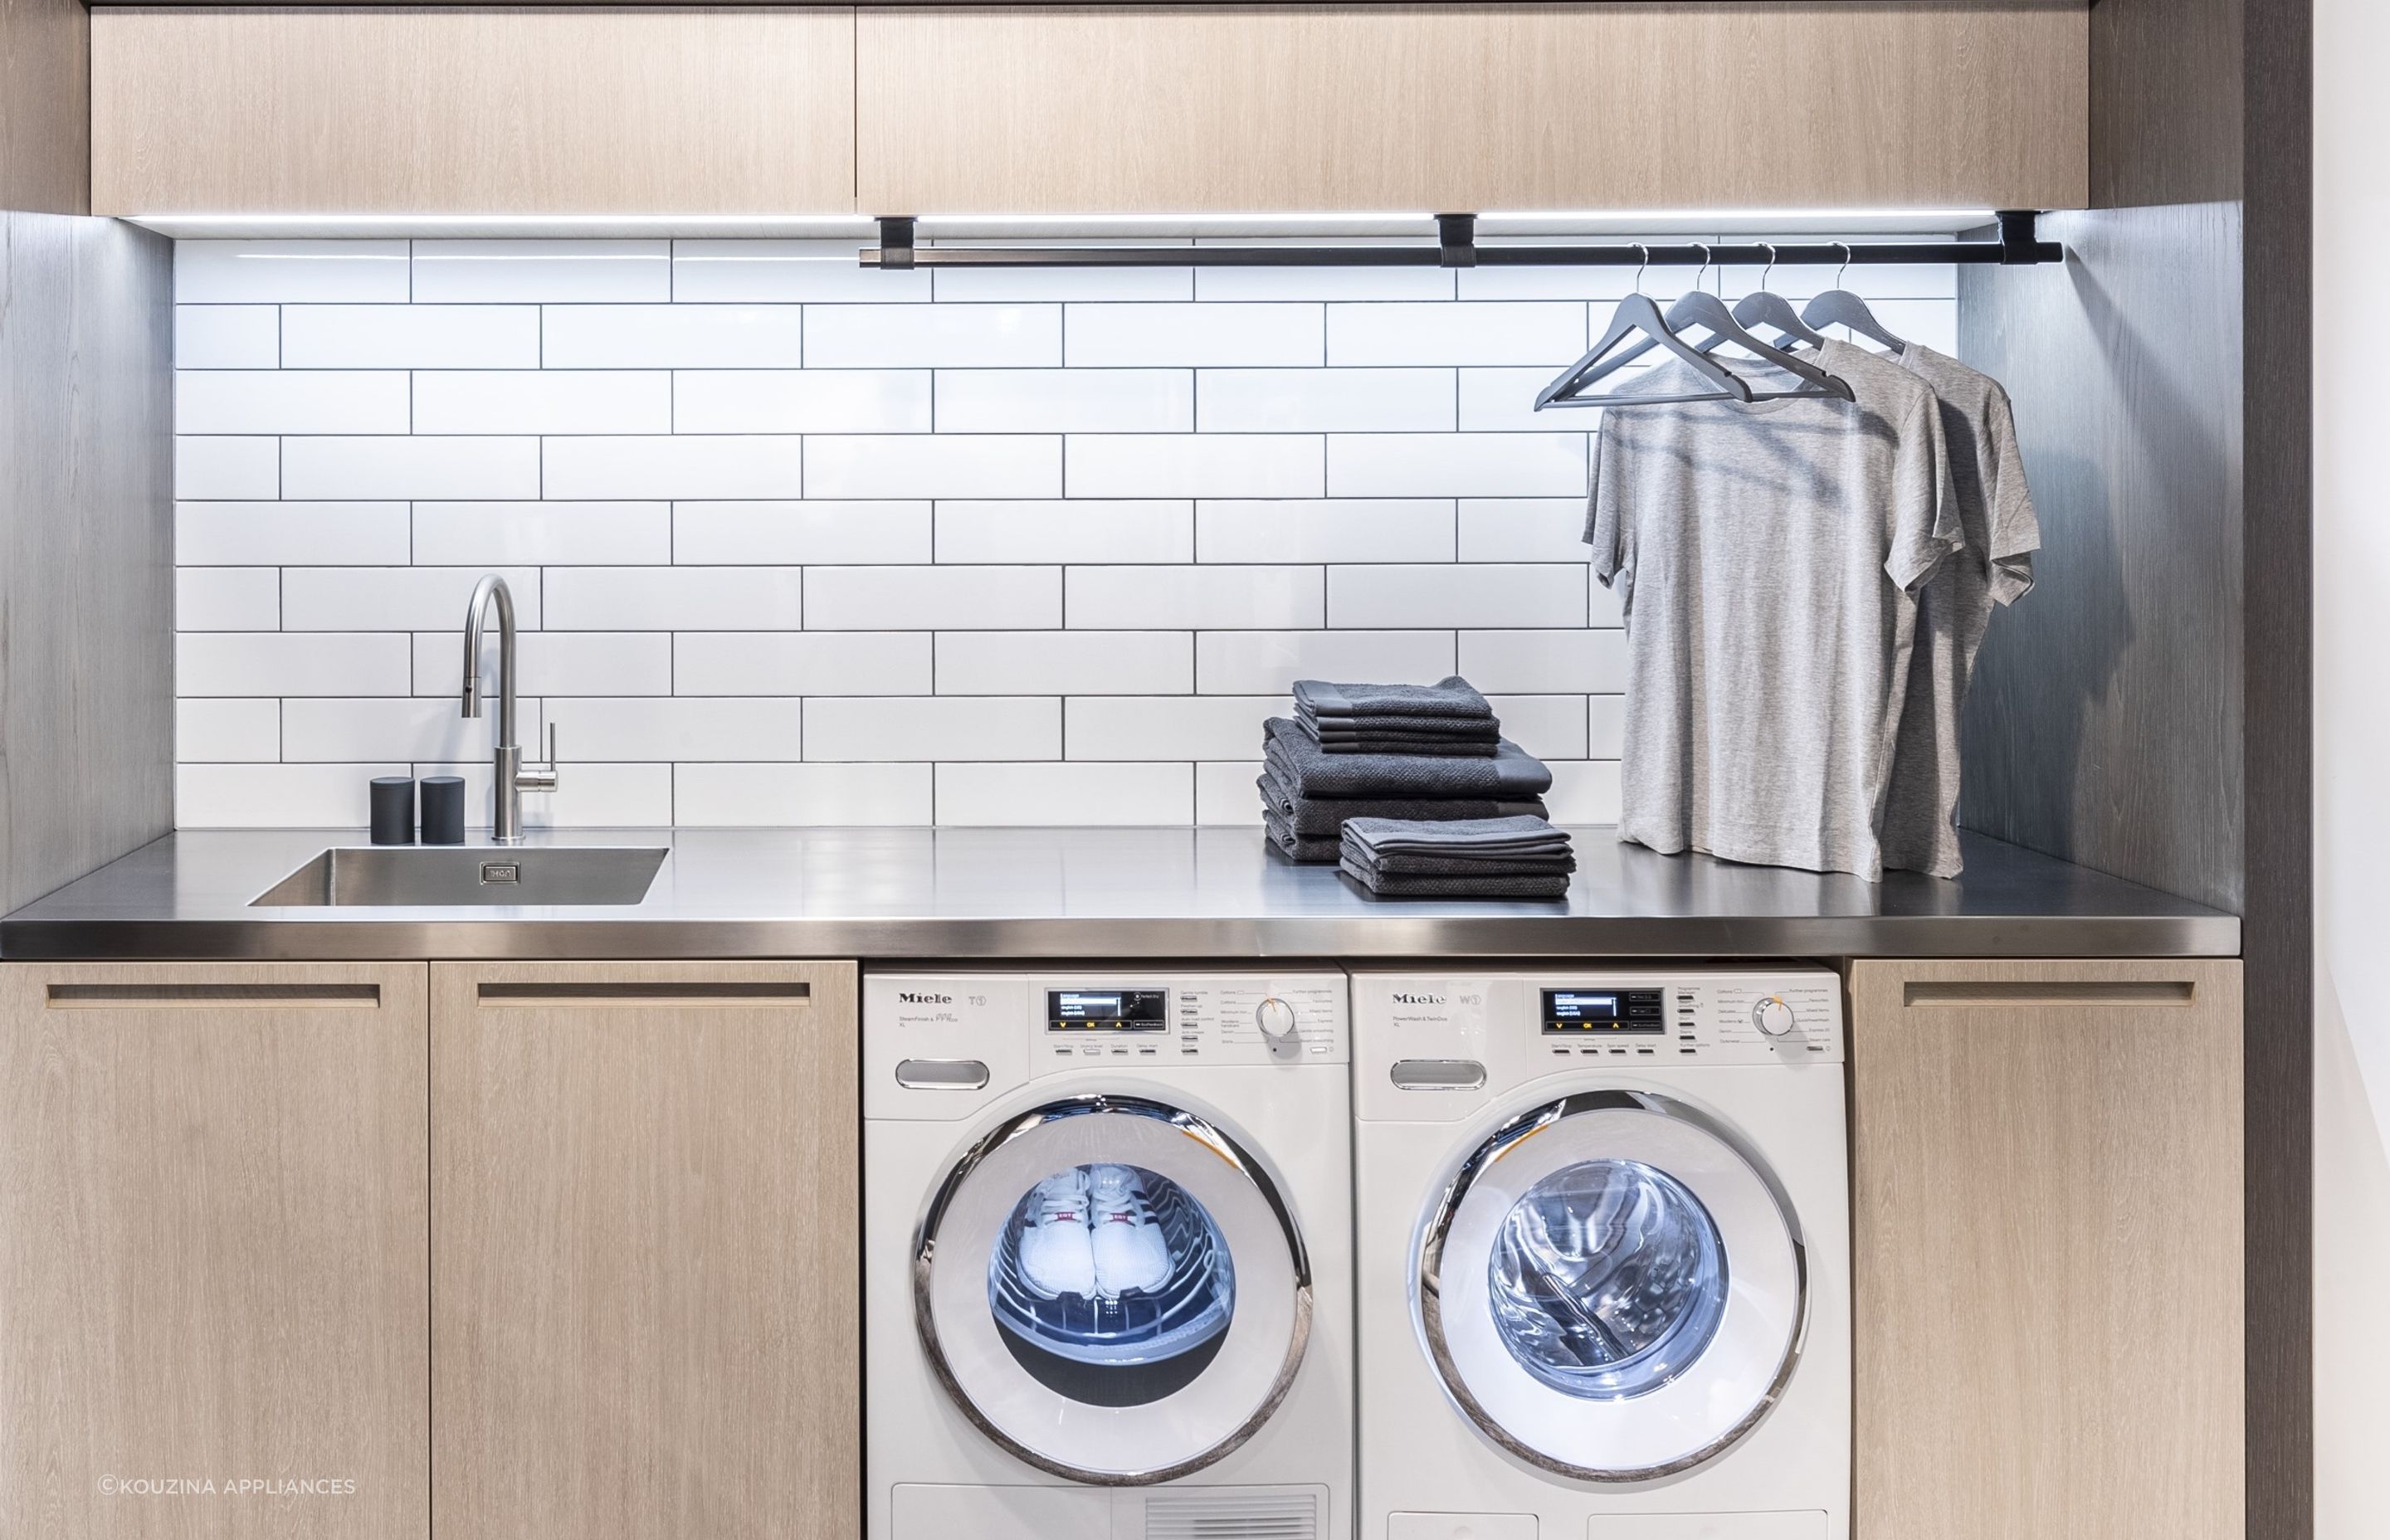 Classic subway tiles are a popular choice for a laundry splashback, seen here in a laundry featuring the equally popular 9KG Condenser Dryer with Heat Pump Technology by Miele.